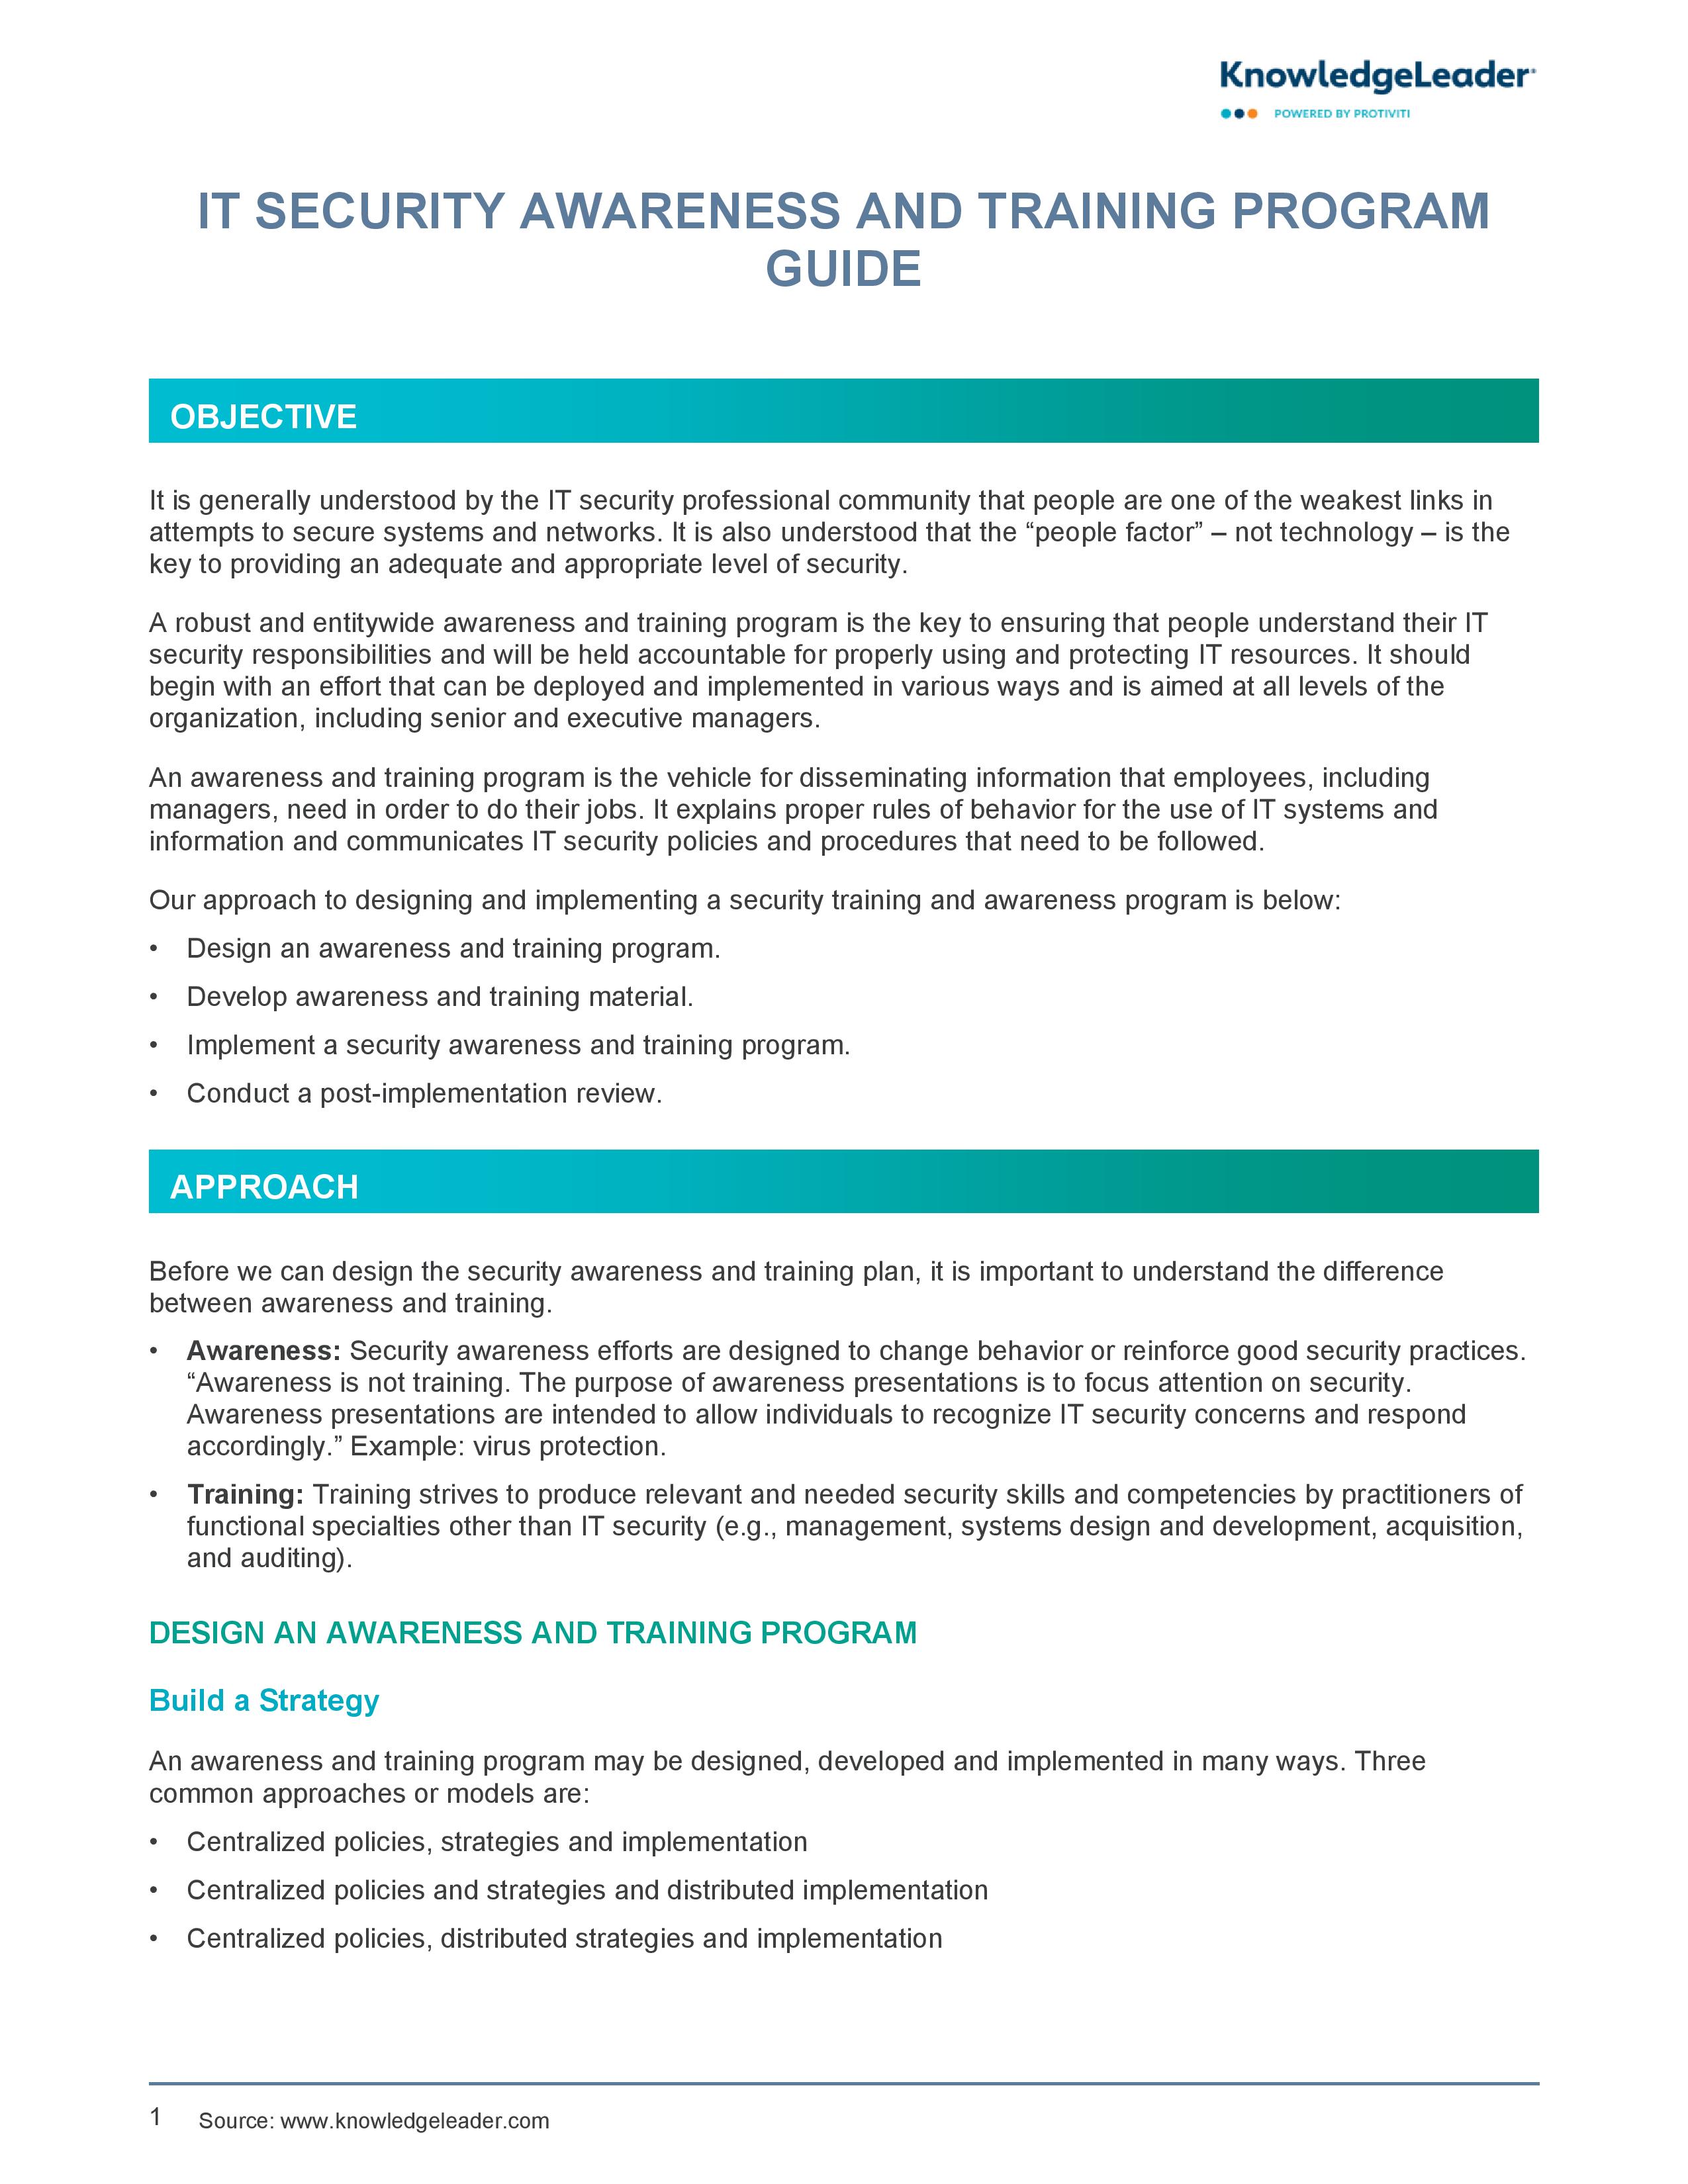 Screenshot of the first page of IT Security Awareness and Training Program Guide